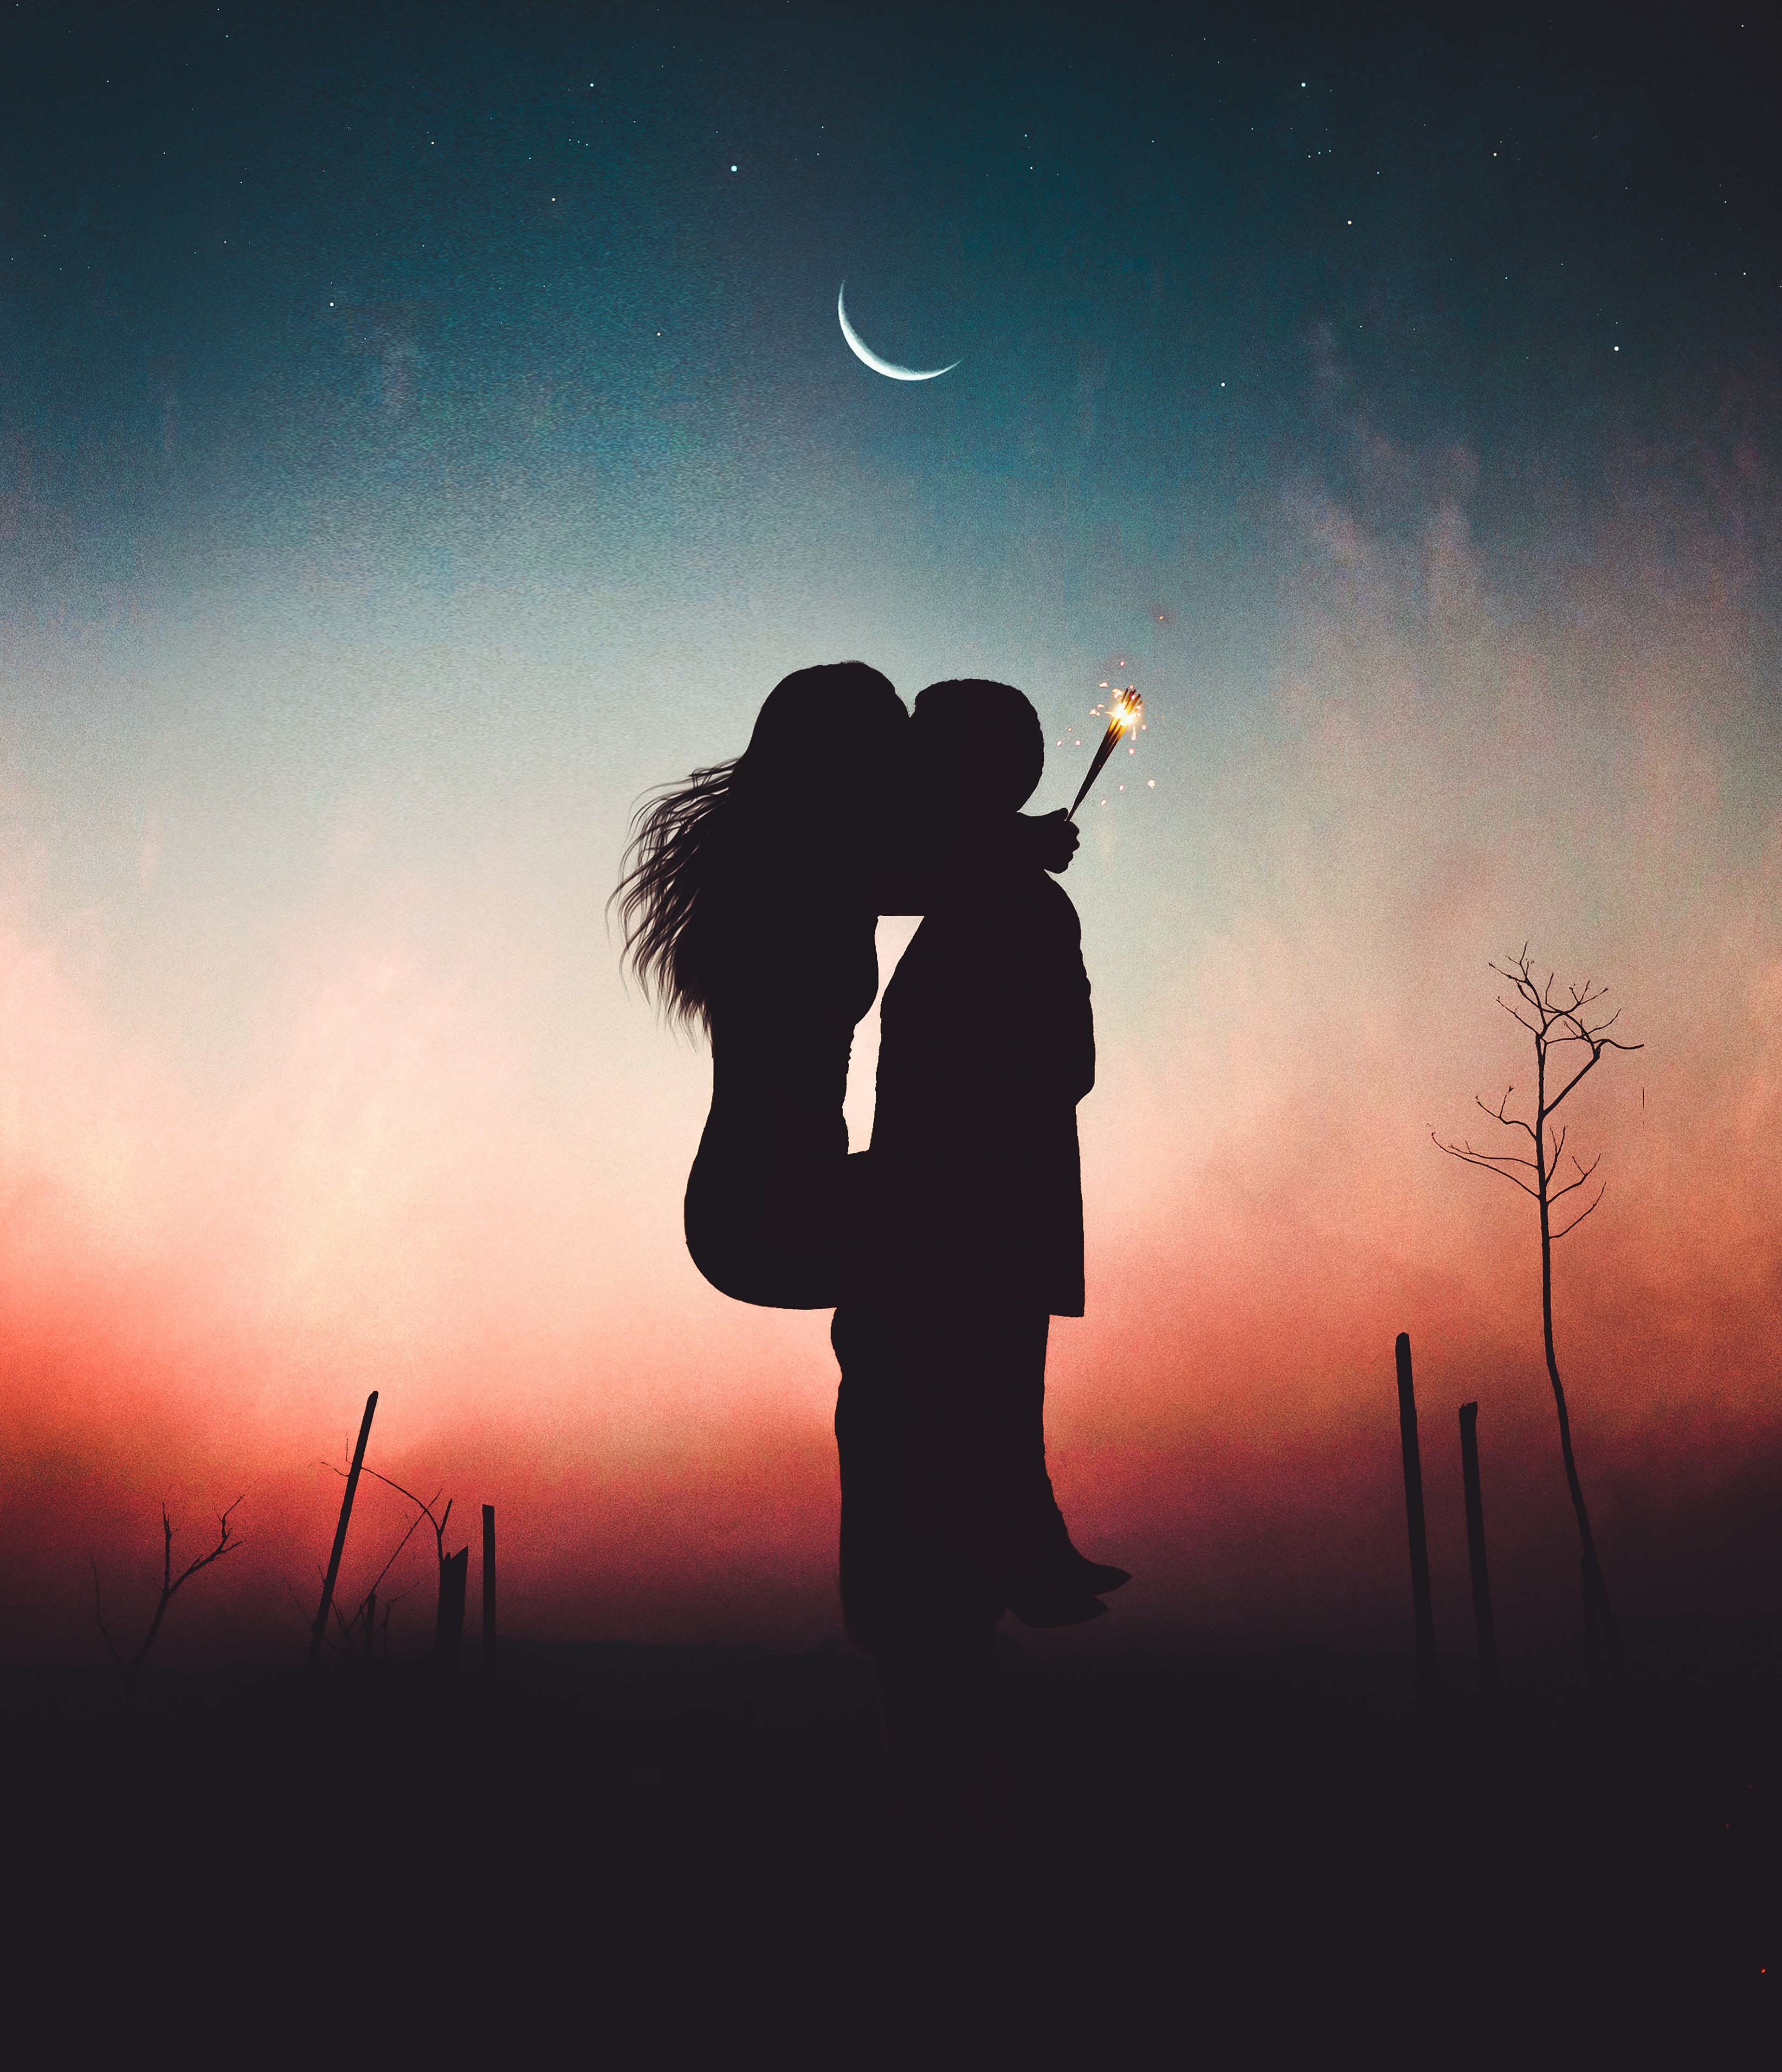 HD wallpaper, Romantic Kiss, Crescent Moon, Pair, Sunset, Couple, Together, Romance, Silhouette, Backlit, Sparklers, First Kiss